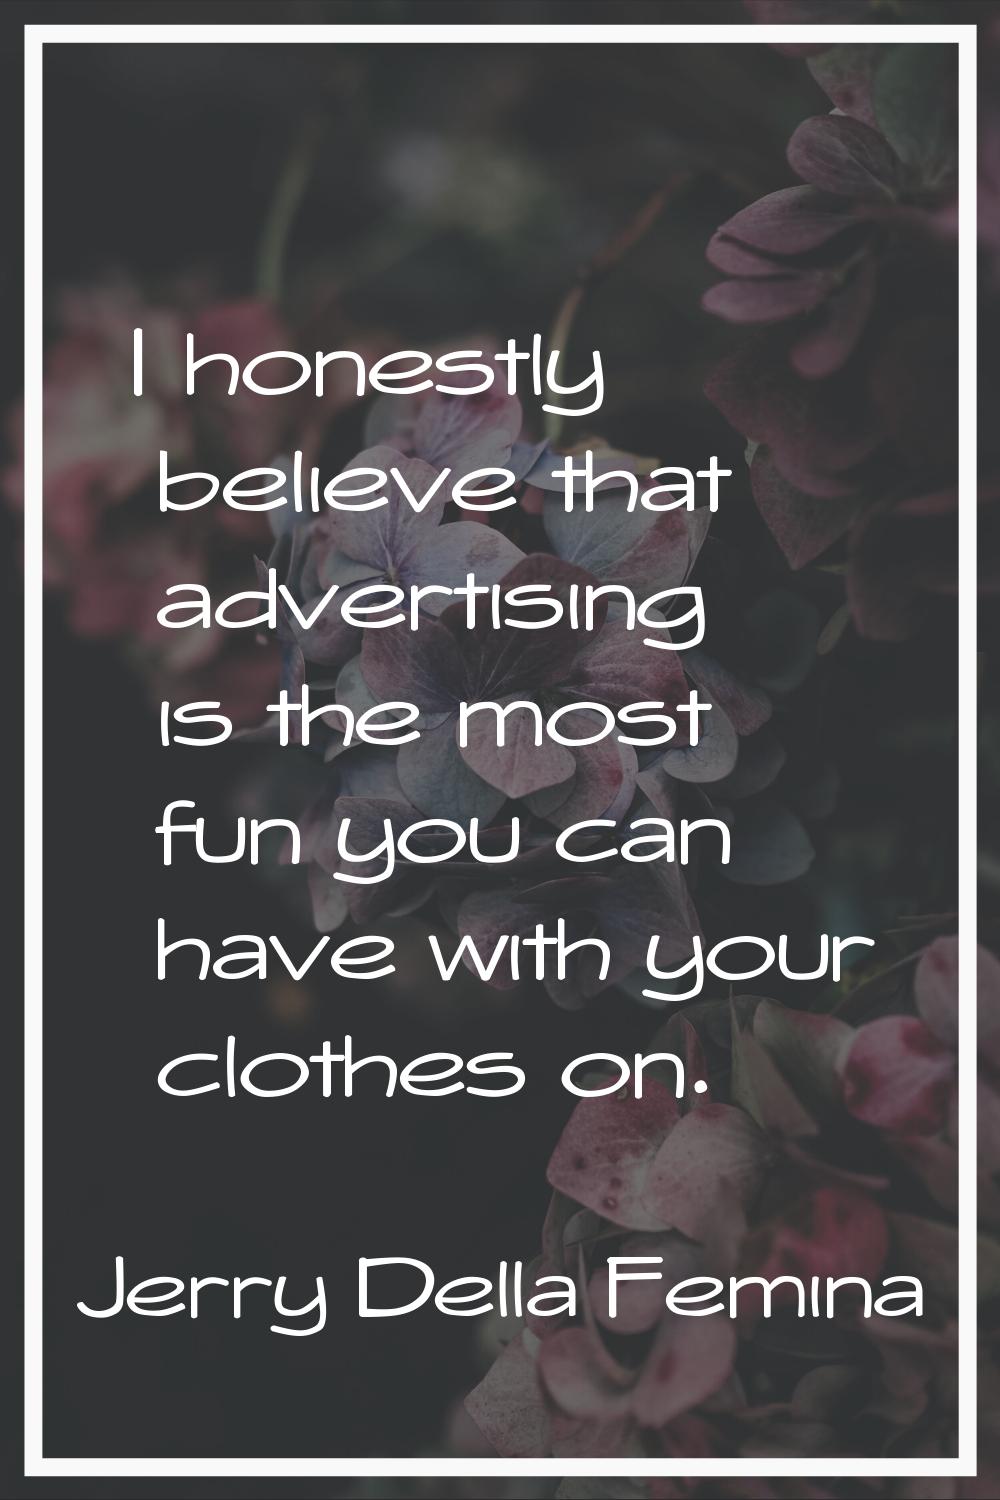 I honestly believe that advertising is the most fun you can have with your clothes on.